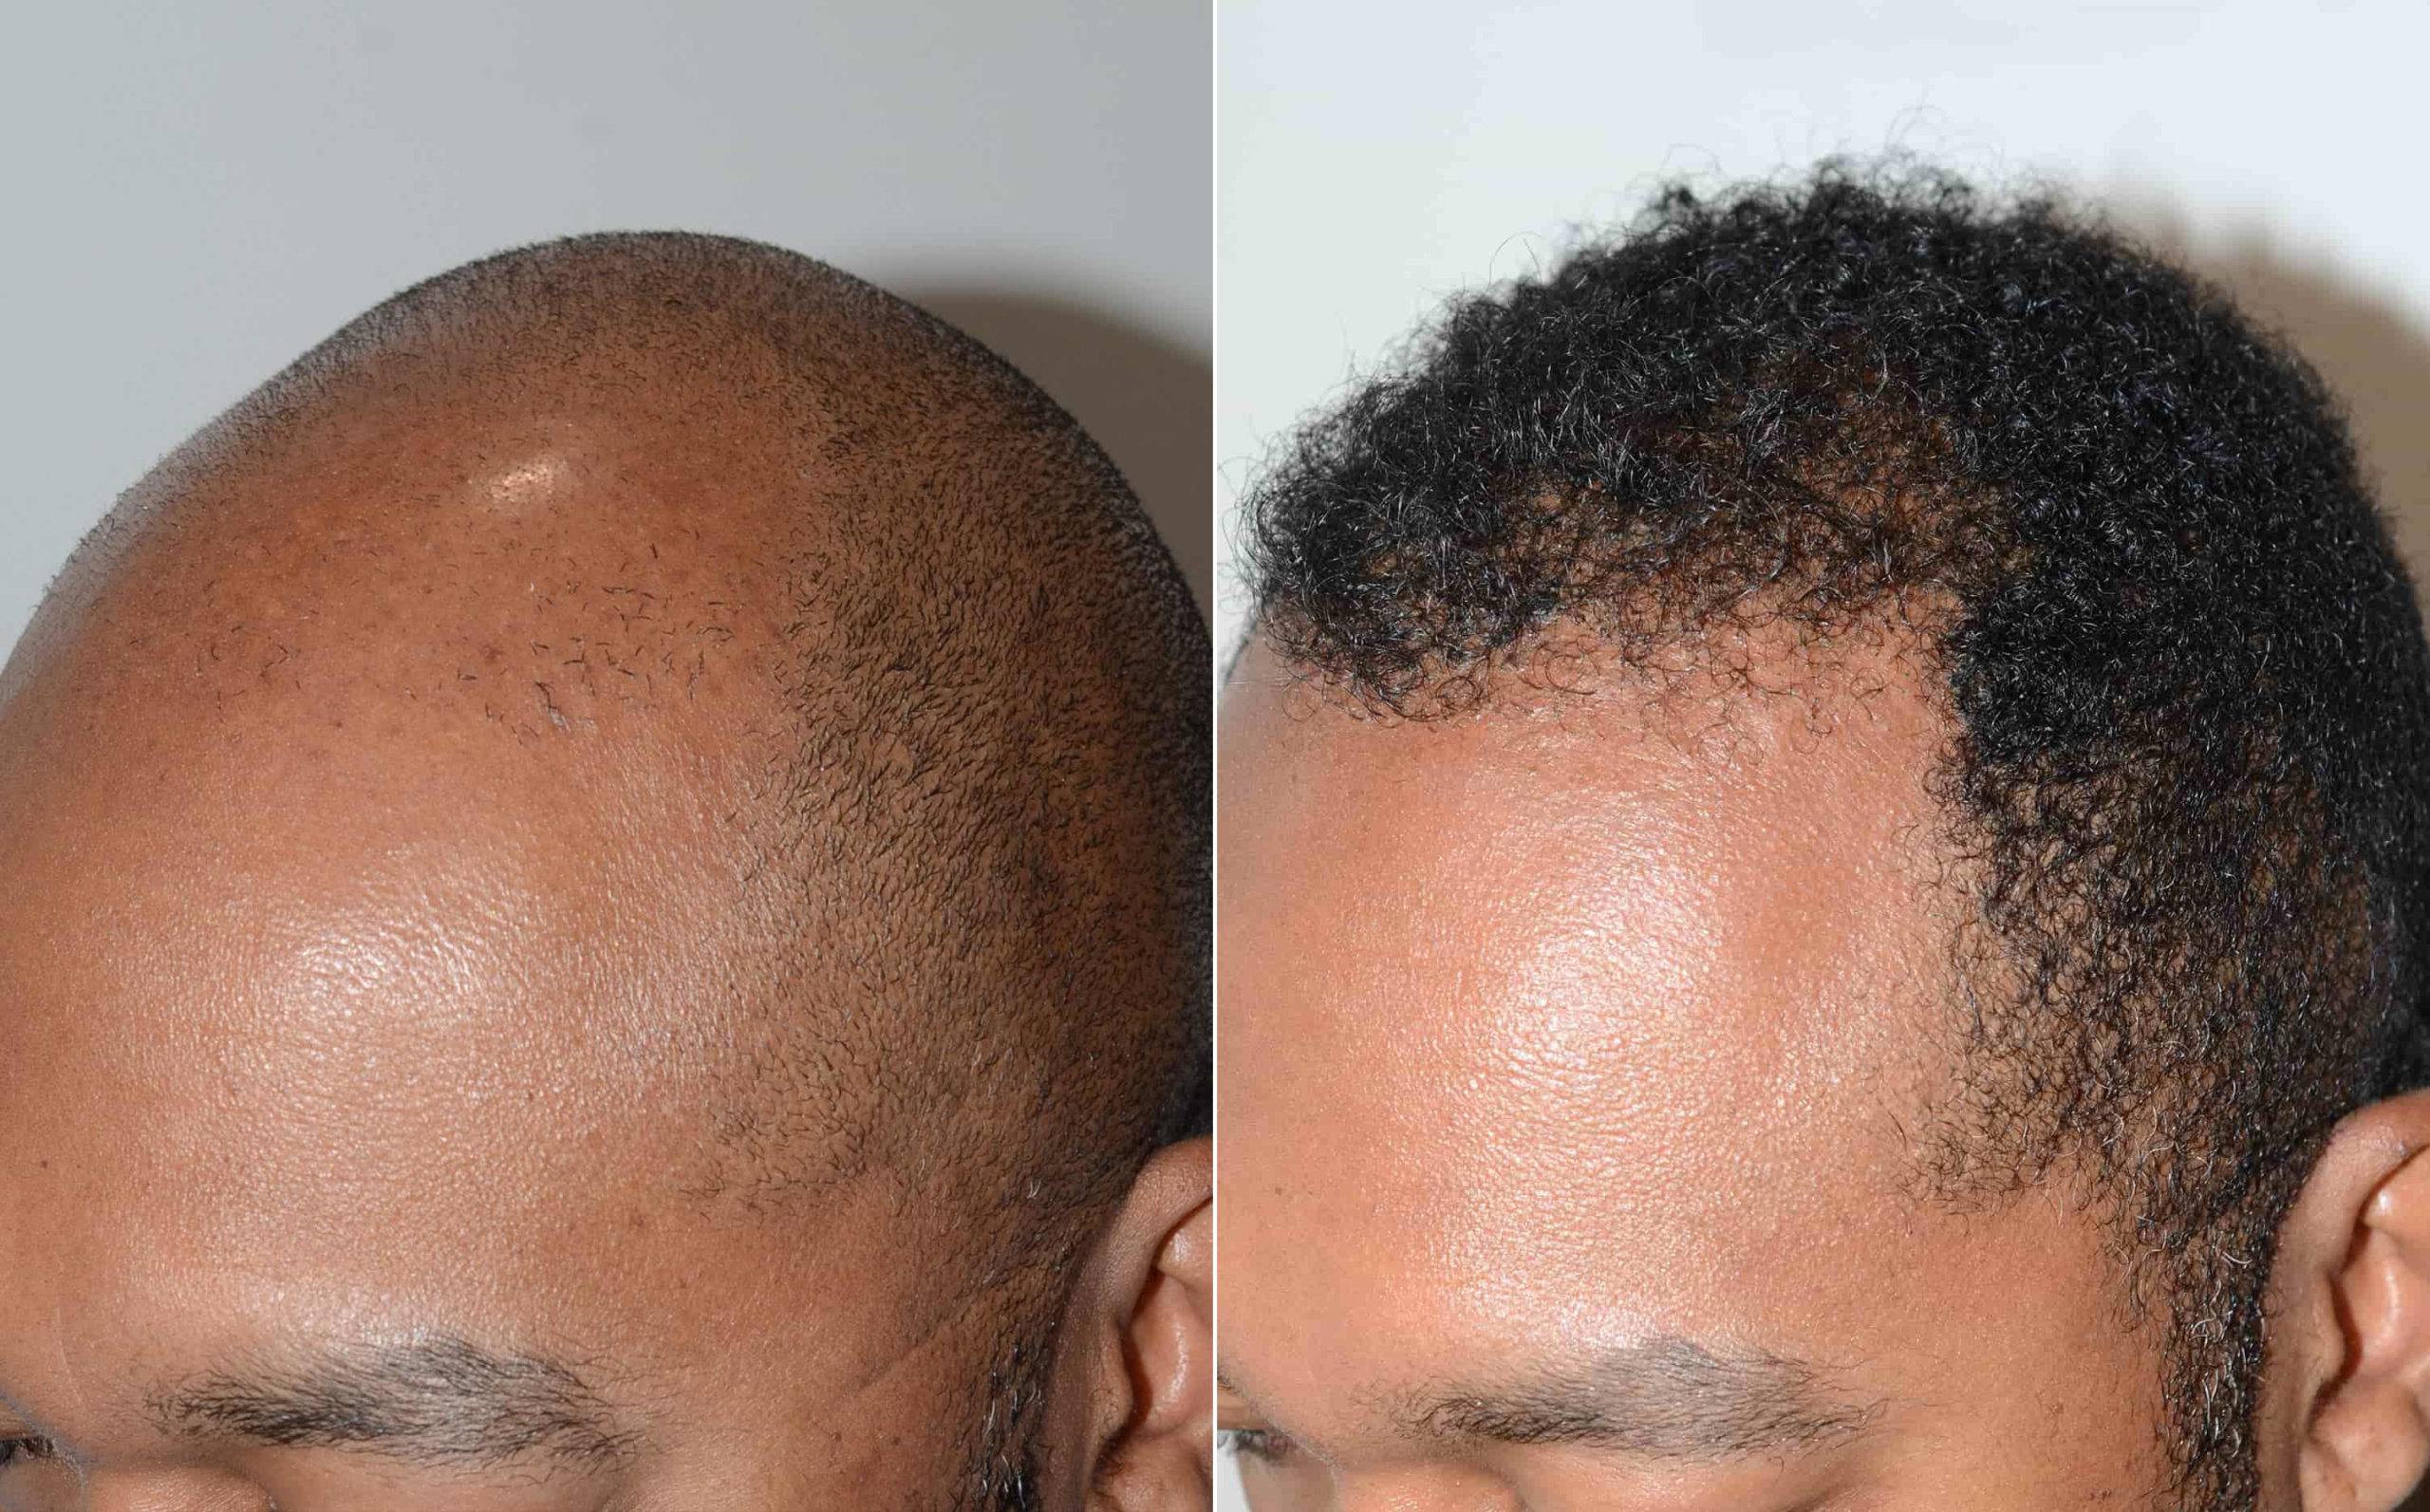 Black hair has unique features and tends to be curly, which can make it more challenging to harvest and transplant during hair restoration.